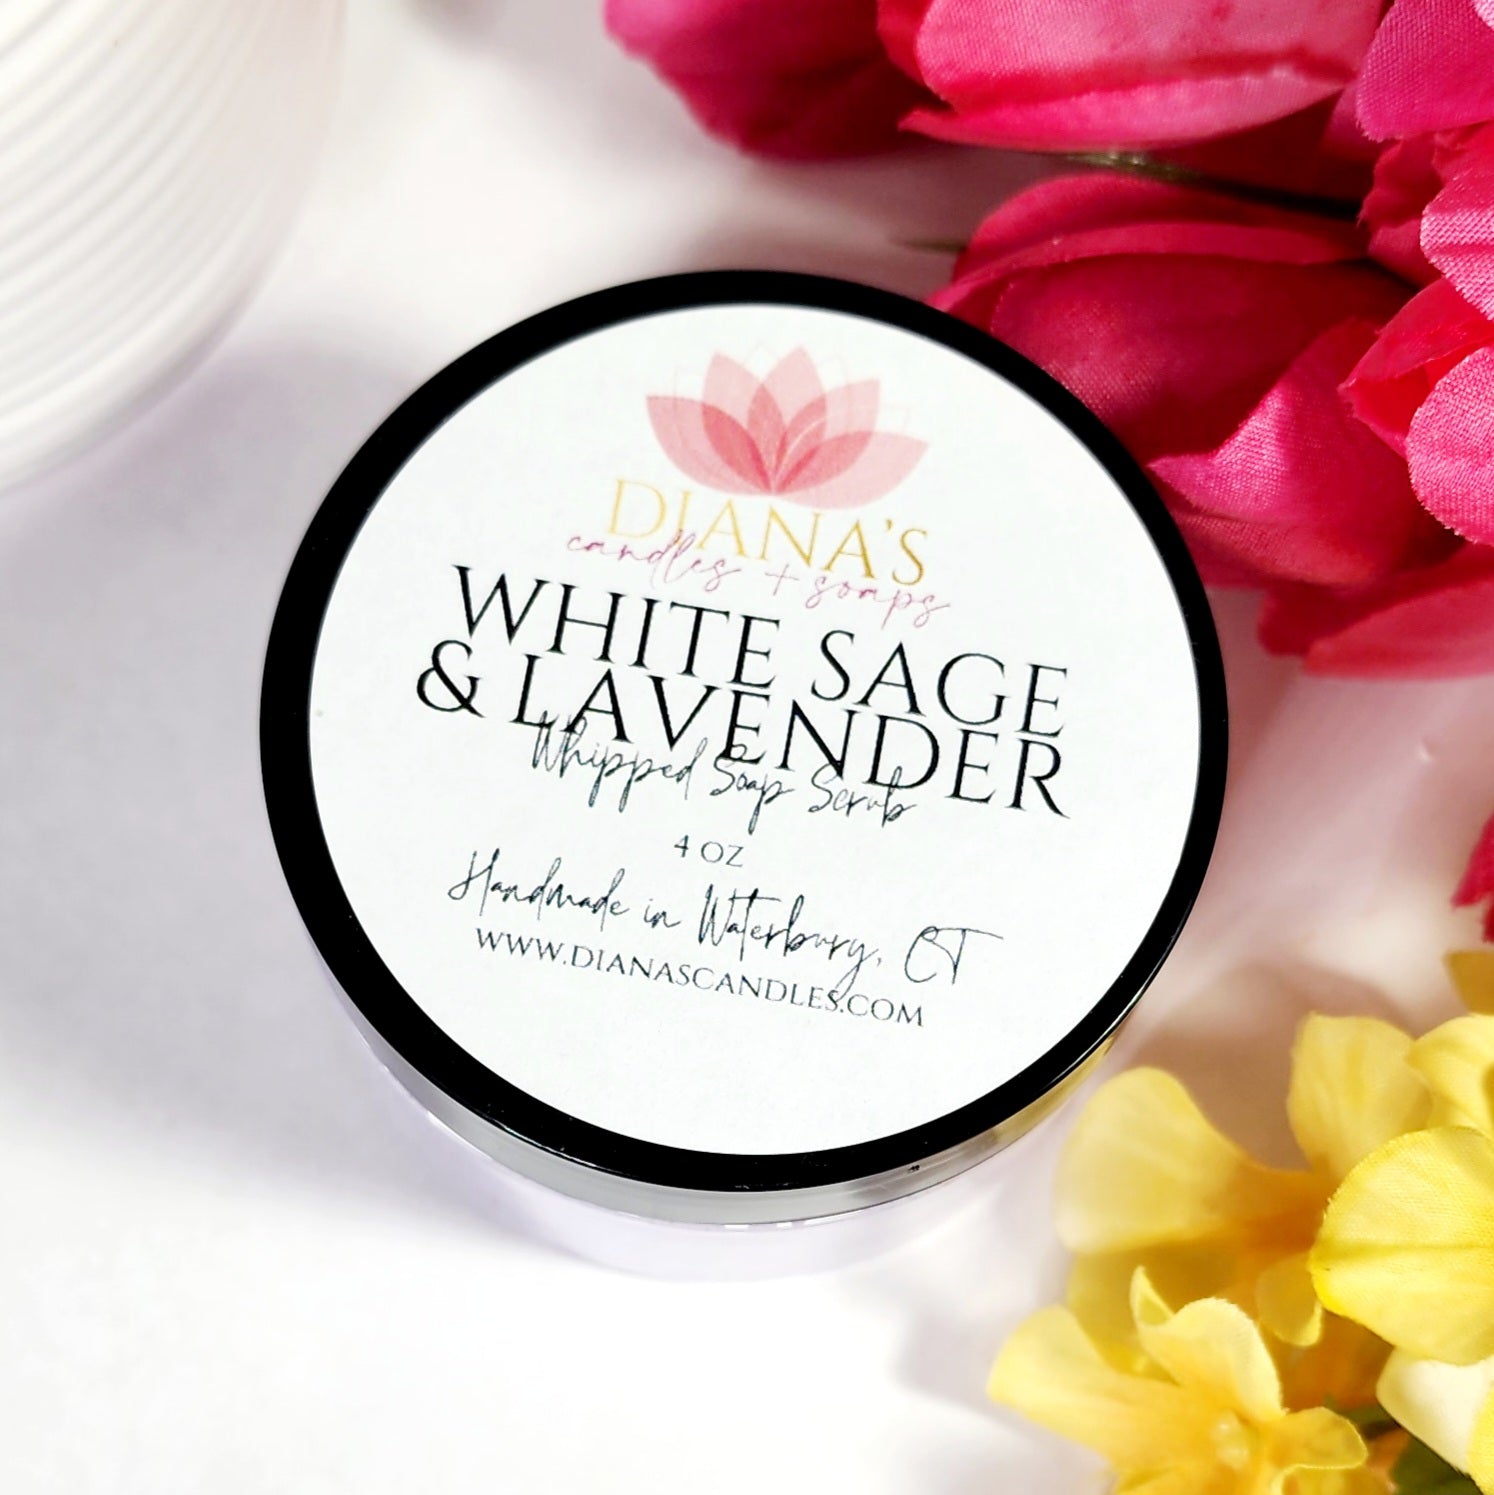 White Sage & Lavender Whipped Soap Scrub Diana's Candles and Soaps 